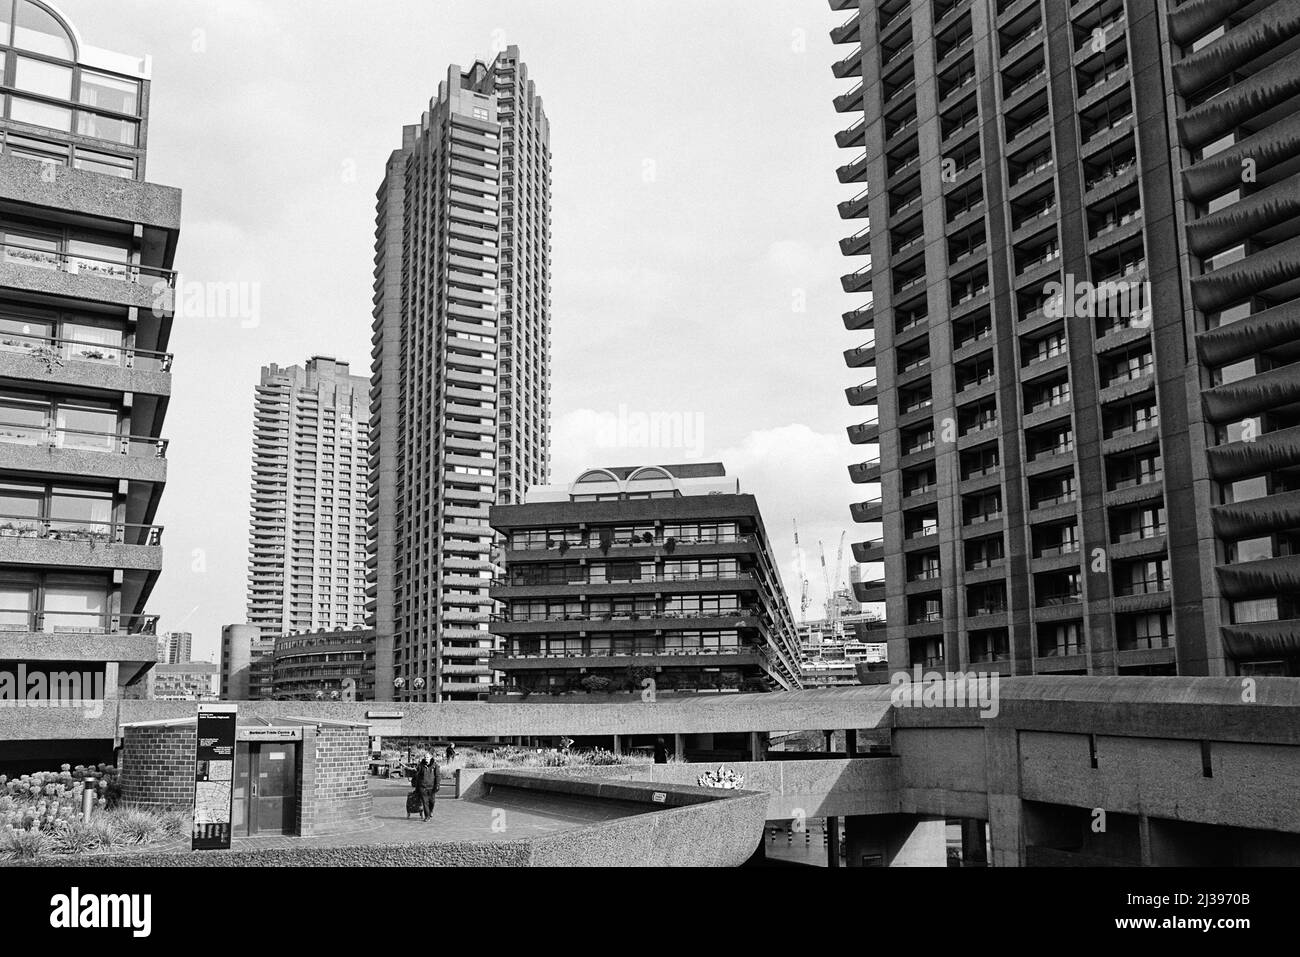 Apartments and tower blocks on the Barbican Estate, viewed from John Trundle Highwalk, in the City of London, South East England Stock Photo